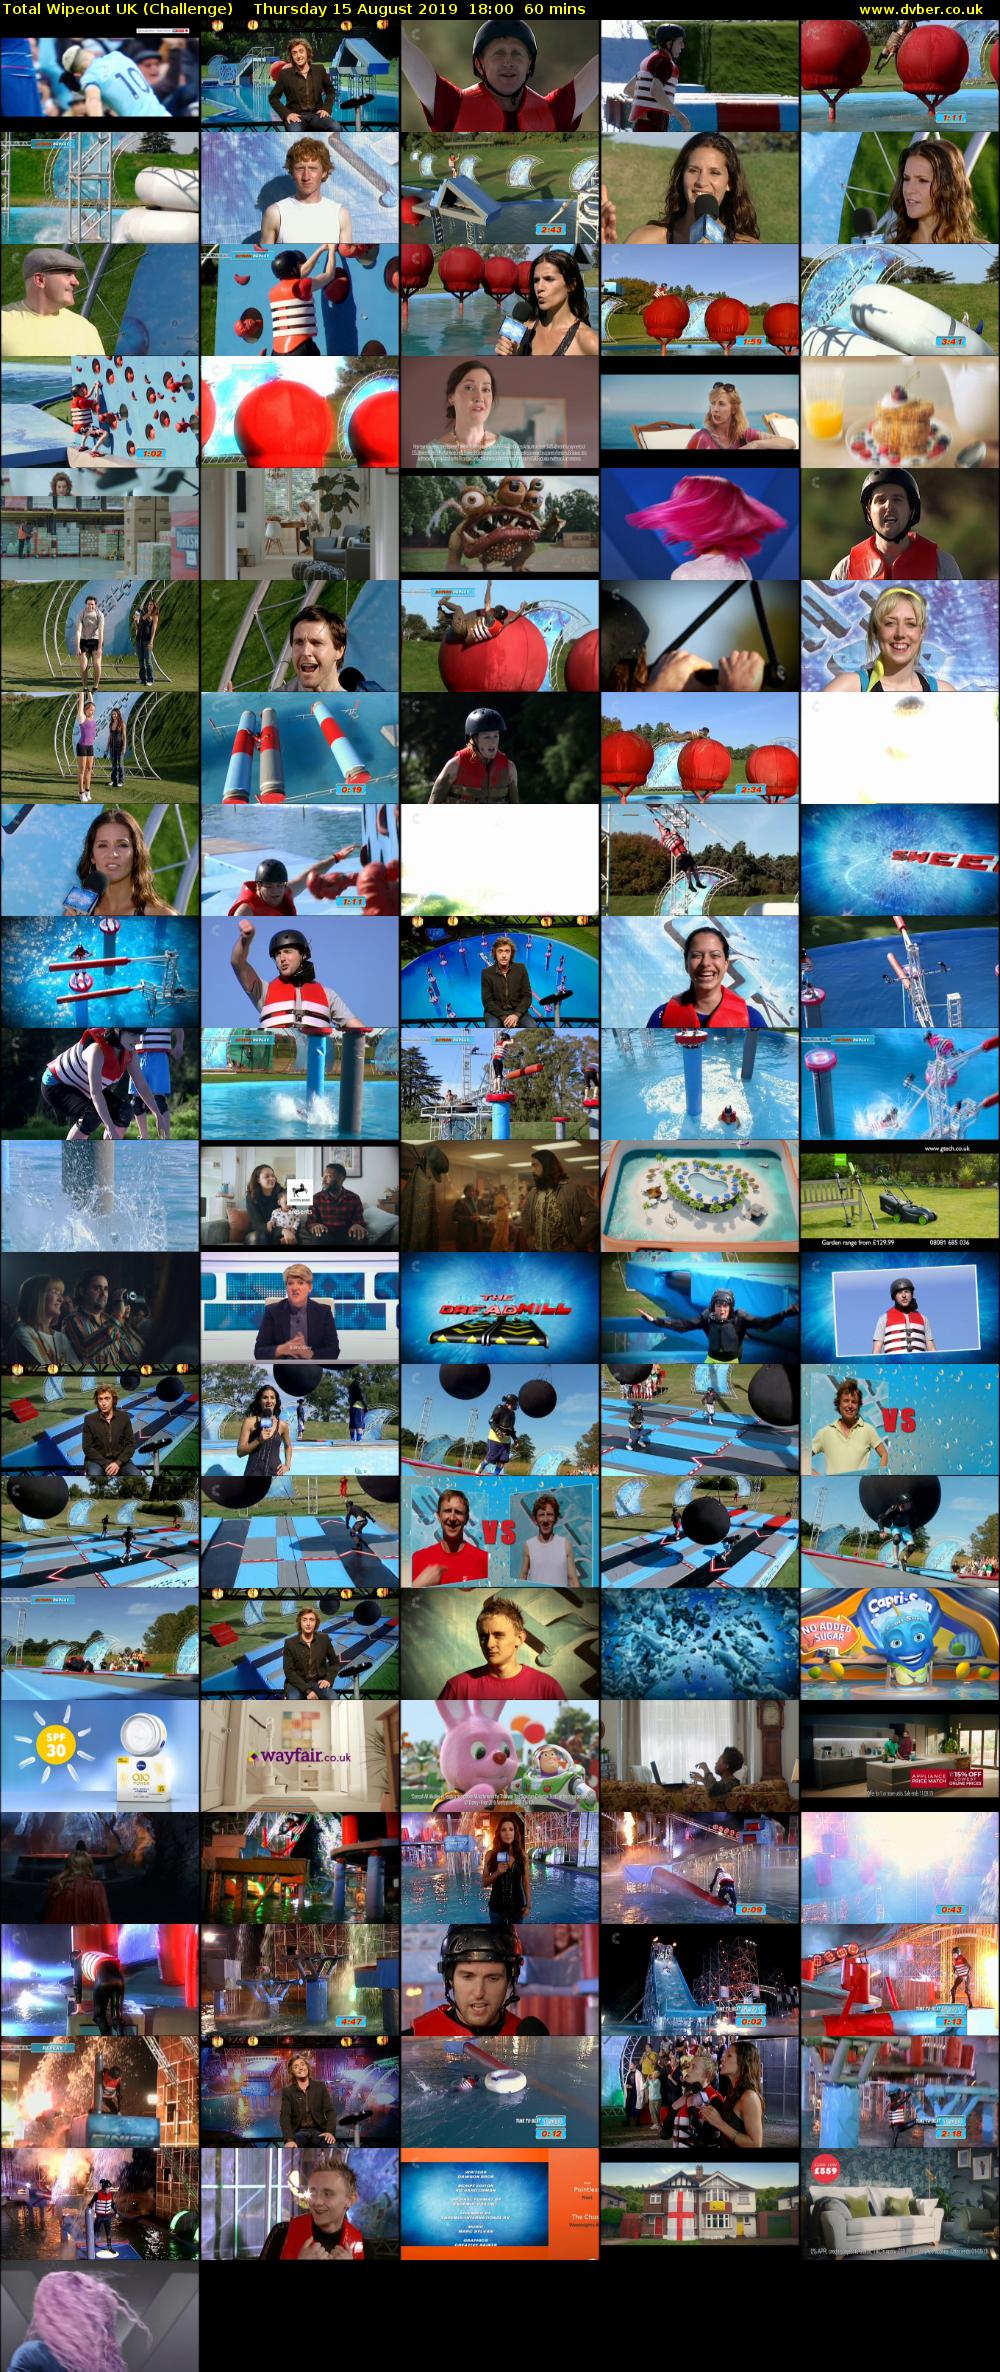 Total Wipeout UK (Challenge) Thursday 15 August 2019 18:00 - 19:00